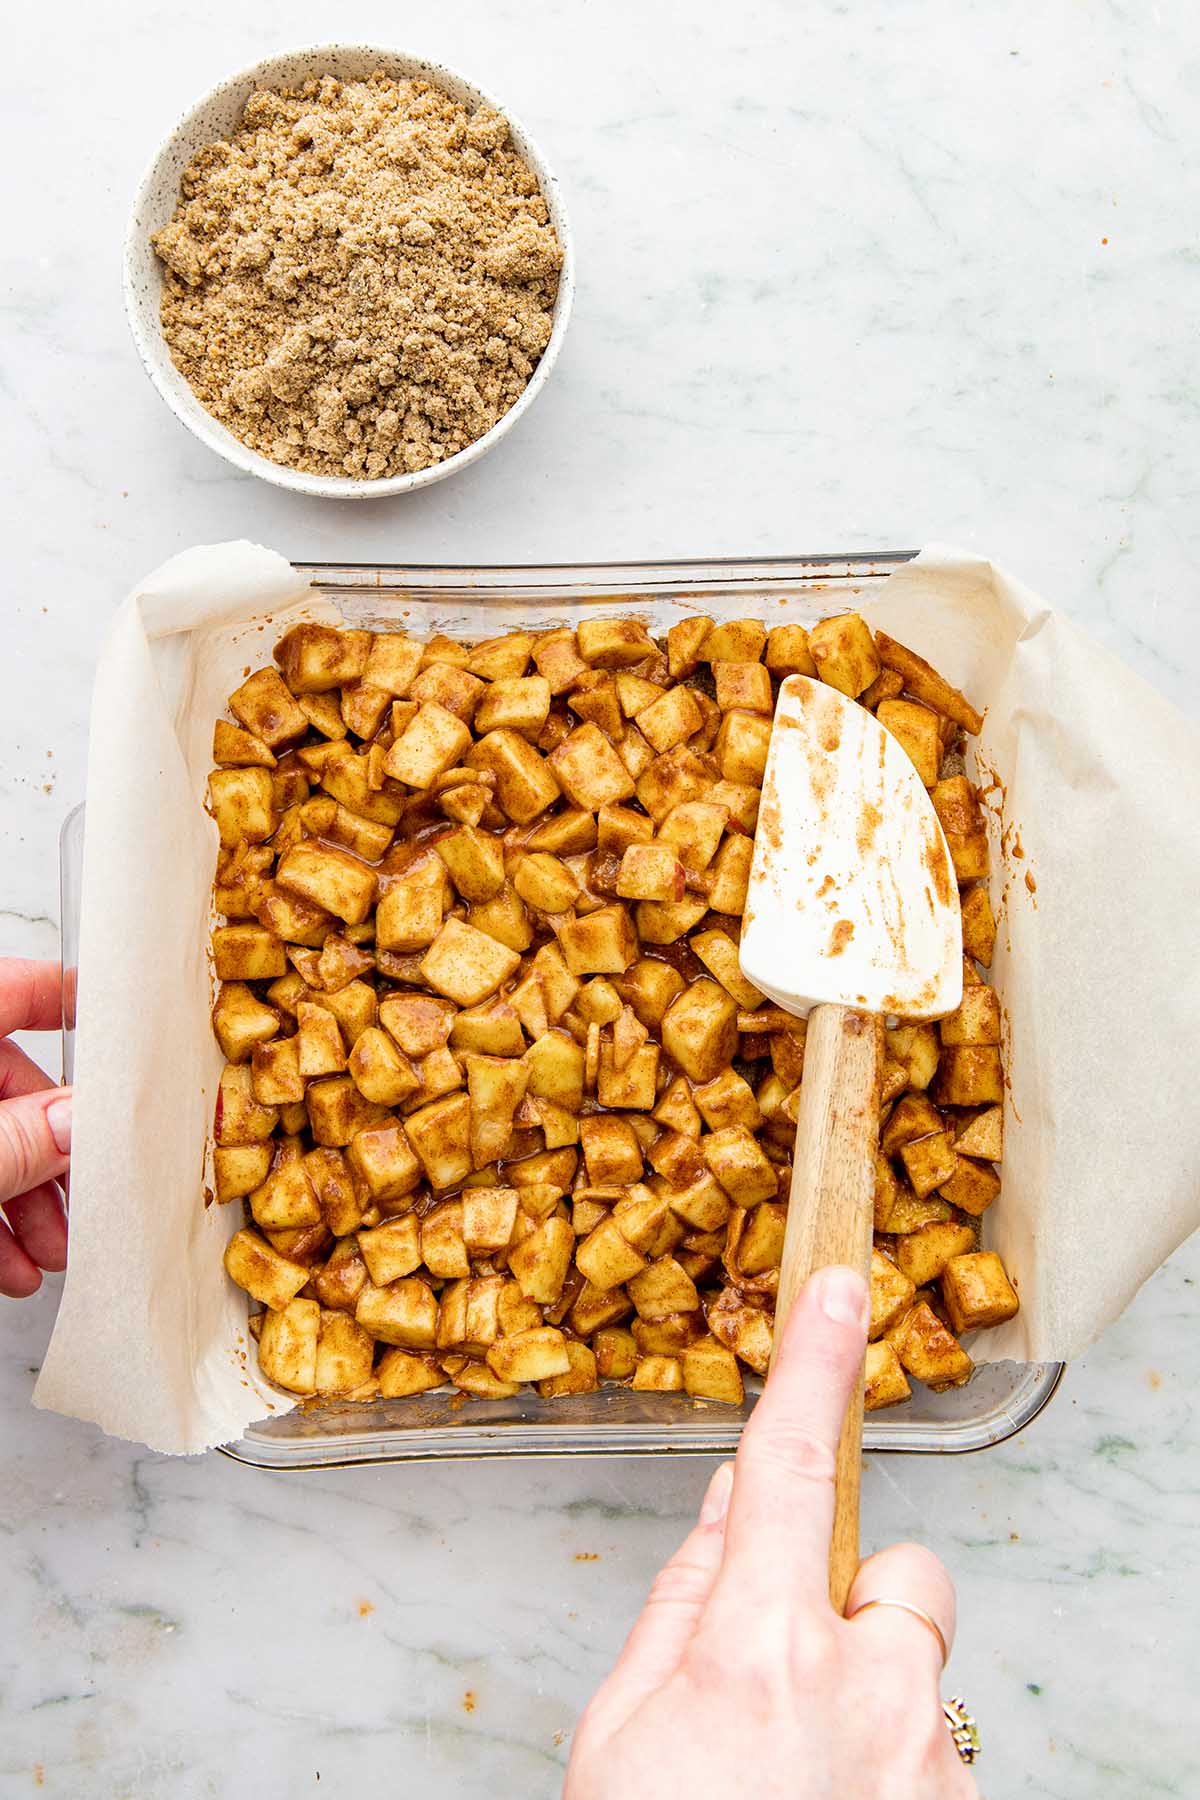 A hand using a rubber spatula to pat chopped apples evenly into a square baking dish.